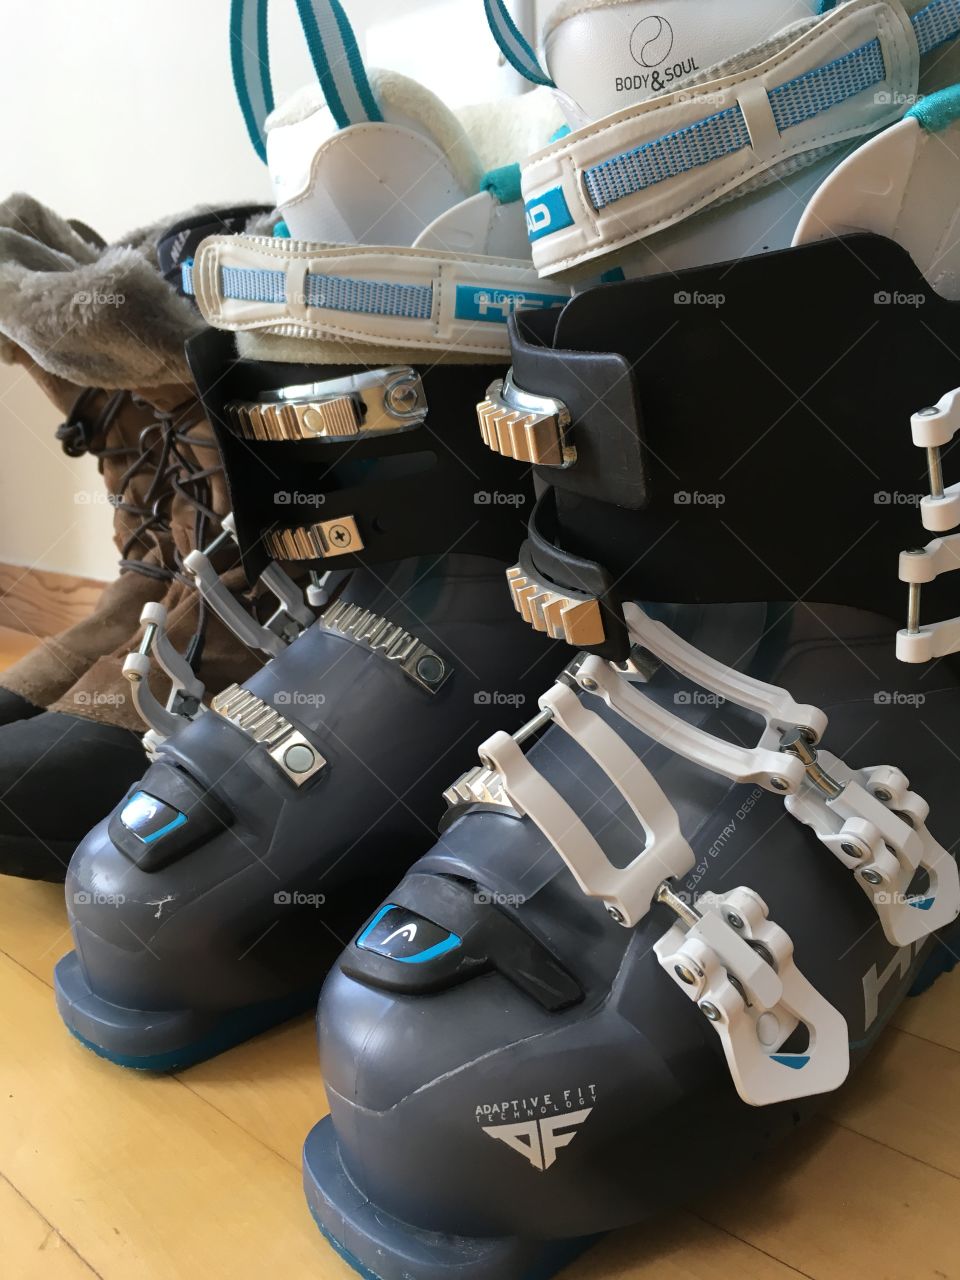 Ski boots and snow boots lined up by the door, ready for snow sport season